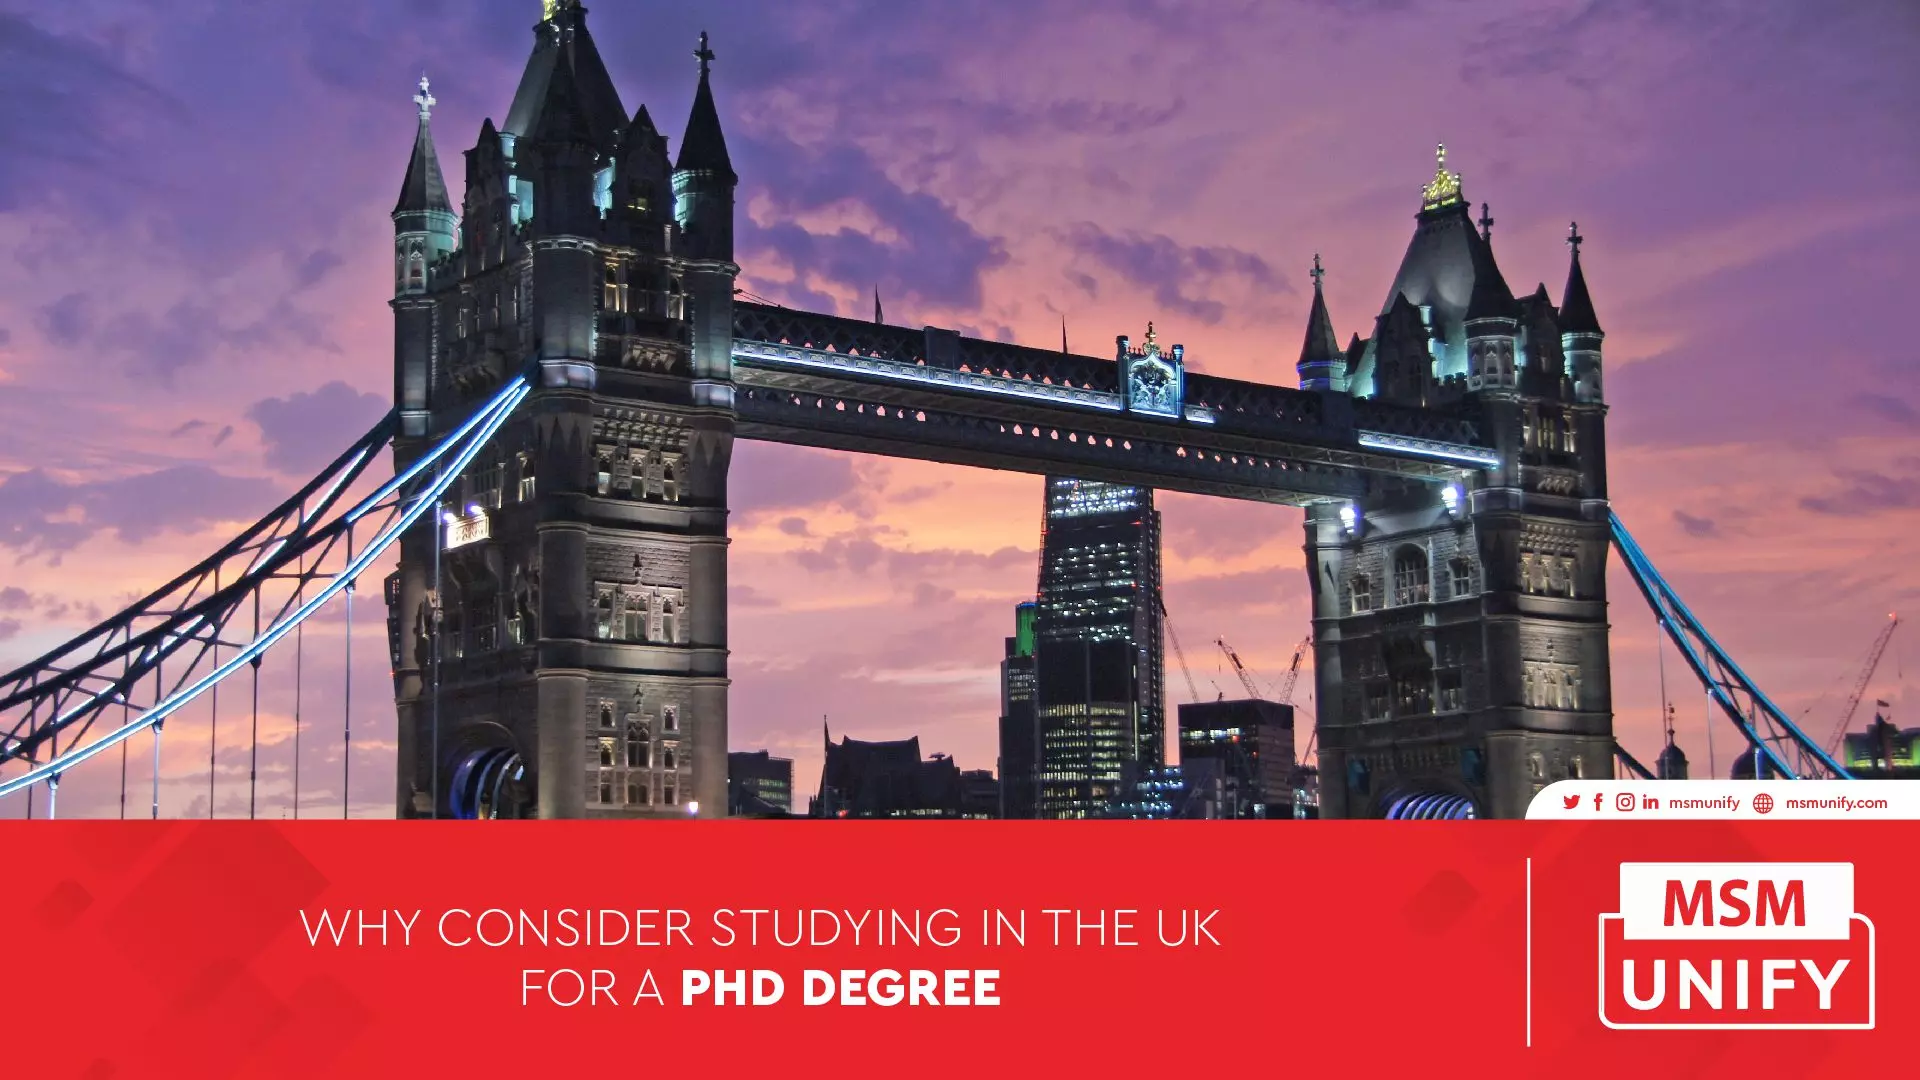 110822 MSM Unify  Why Consider Studying in the UK for a PhD Degree 01